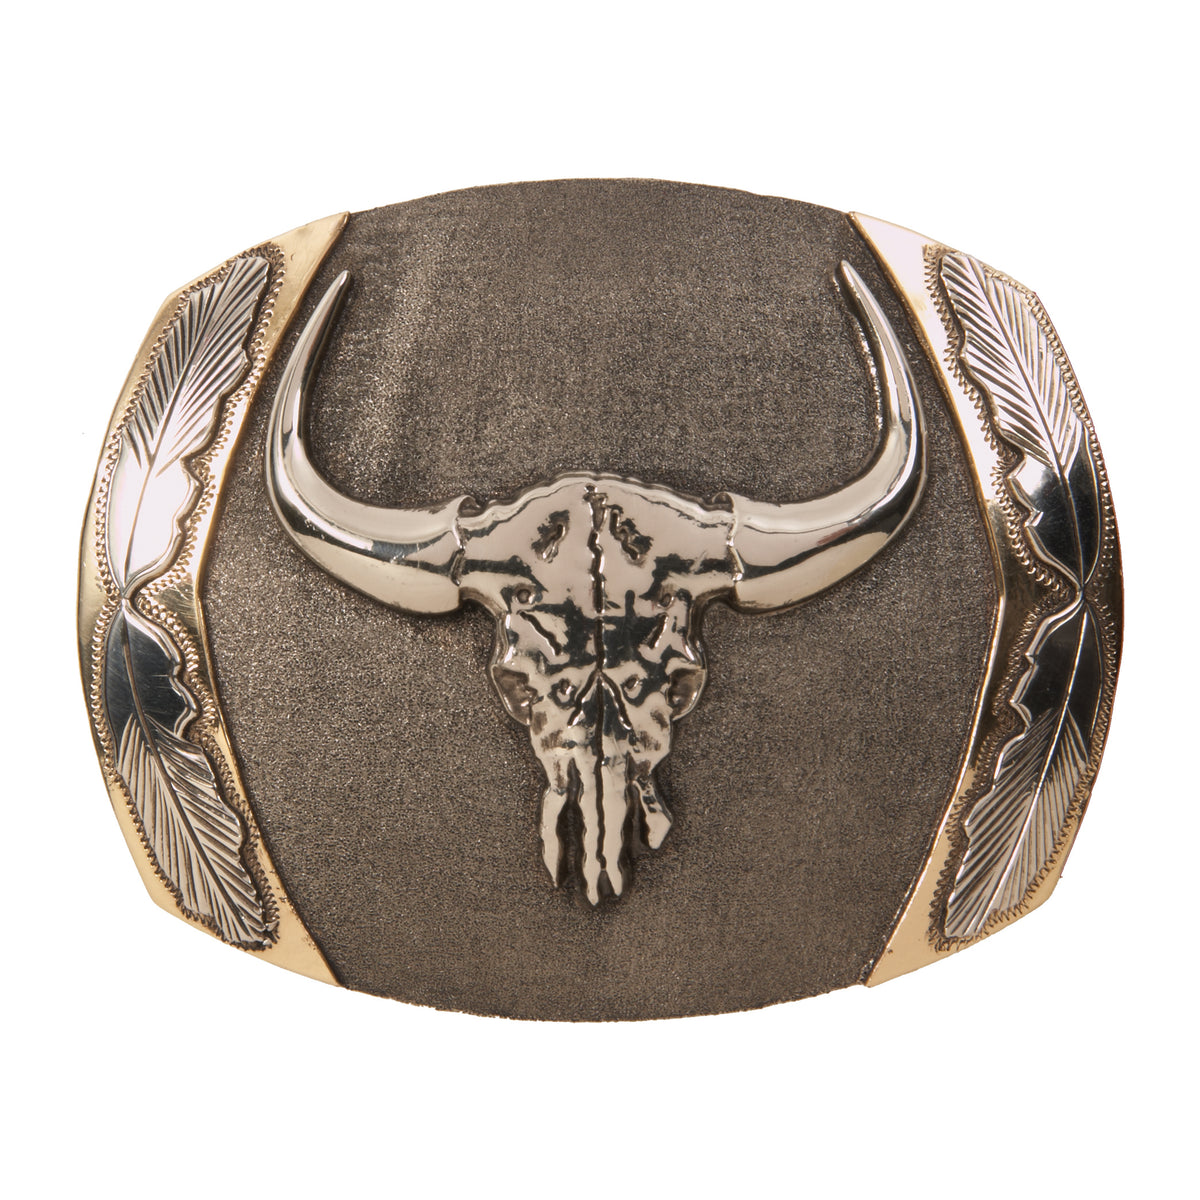 “Big Horn” Longhorn Skull with Feathers Buckle